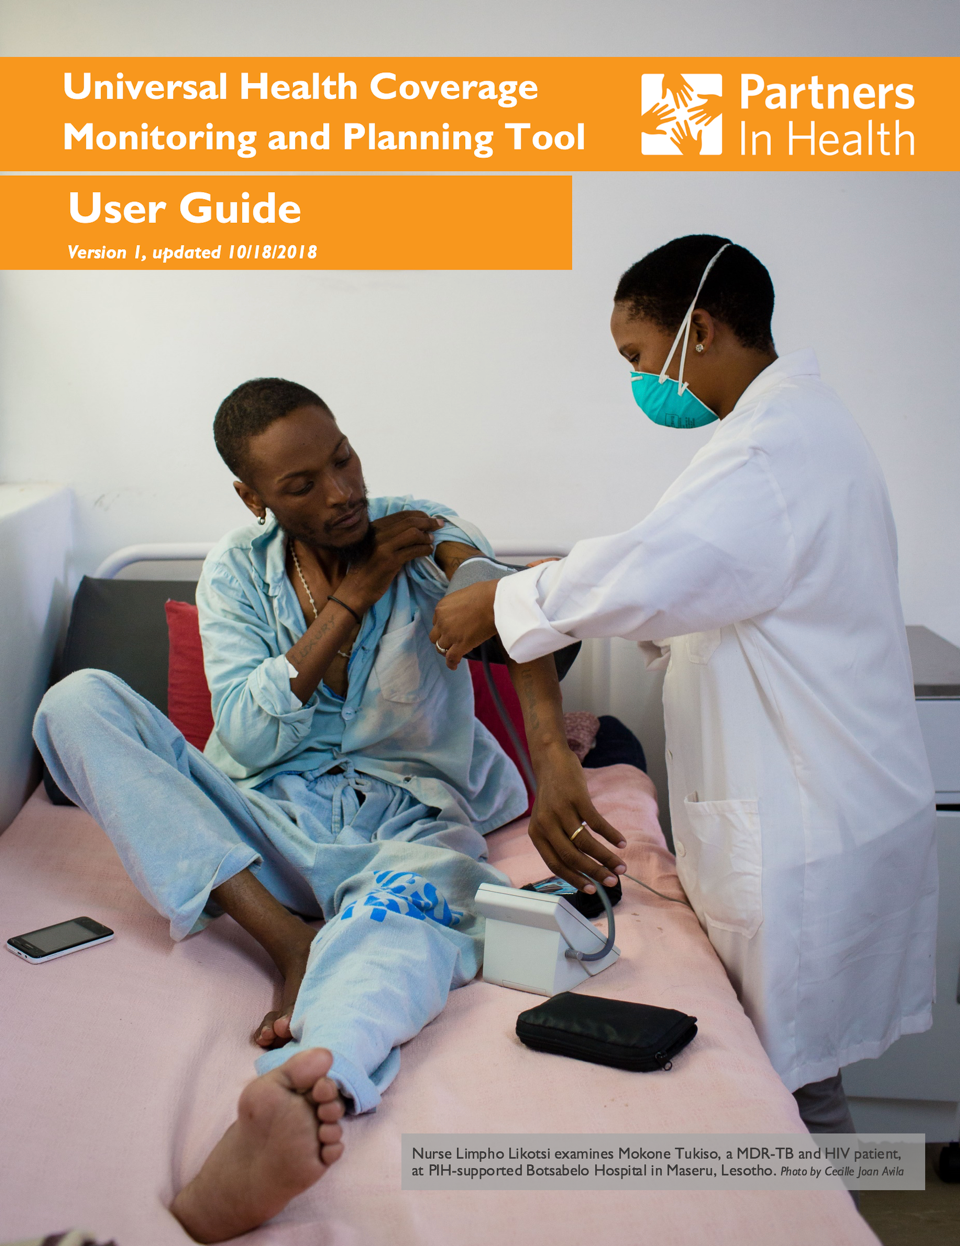 User Guide for UHC Monitoring and Planning Tool